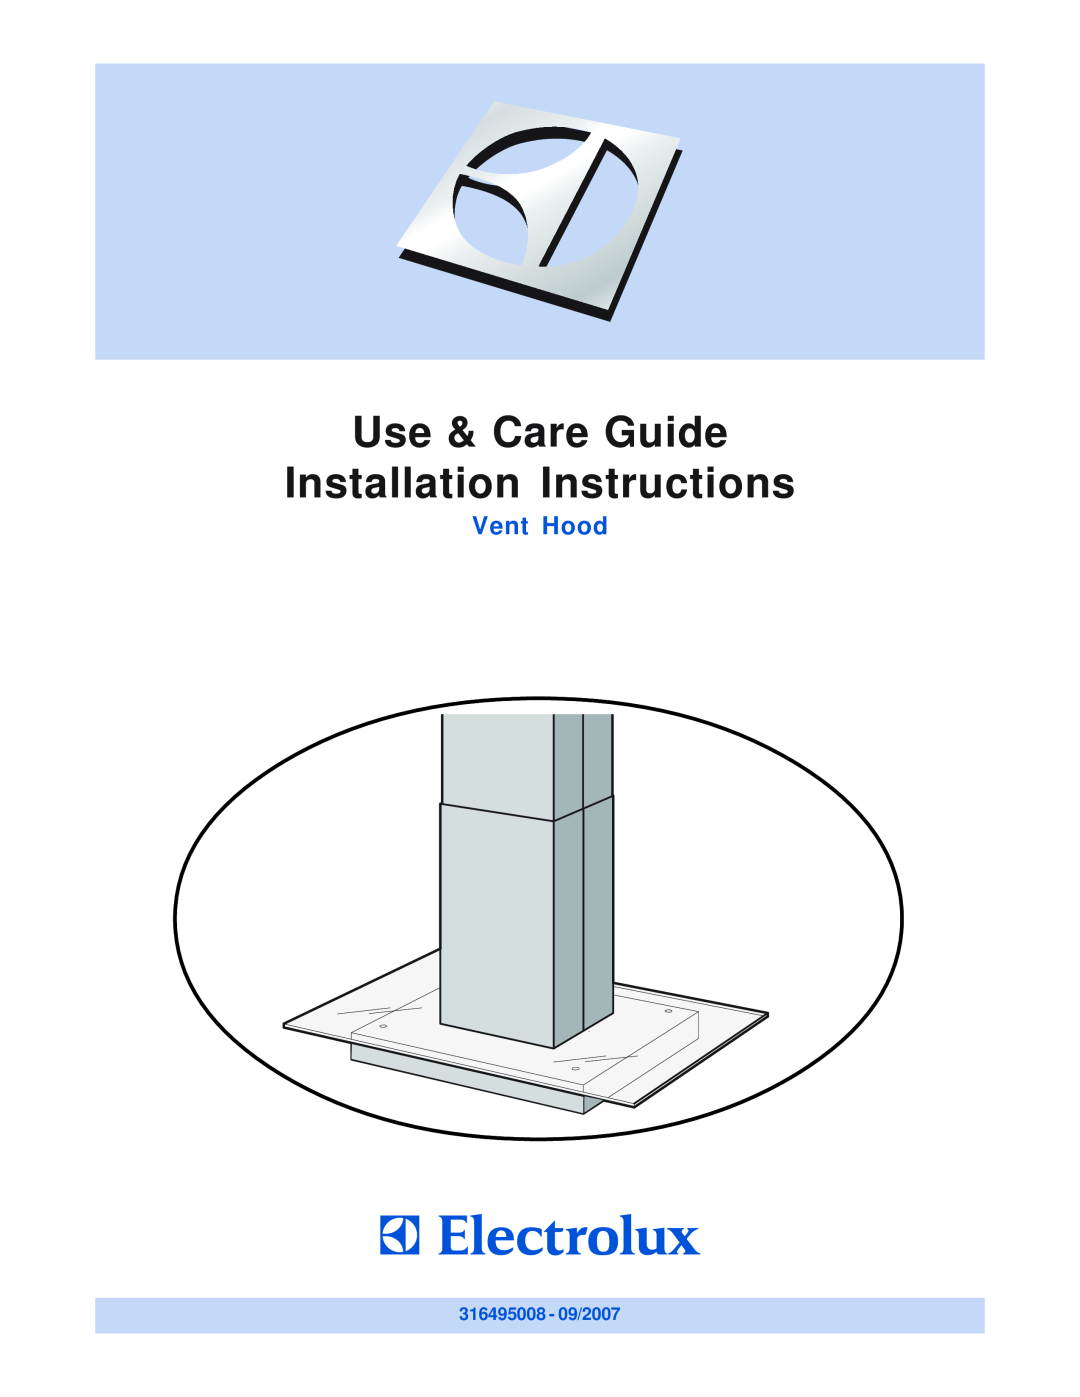 Electrolux installation instructions 316495008 - 09/2007, Use & Care Guide Installation Instructions, Vent Hood 